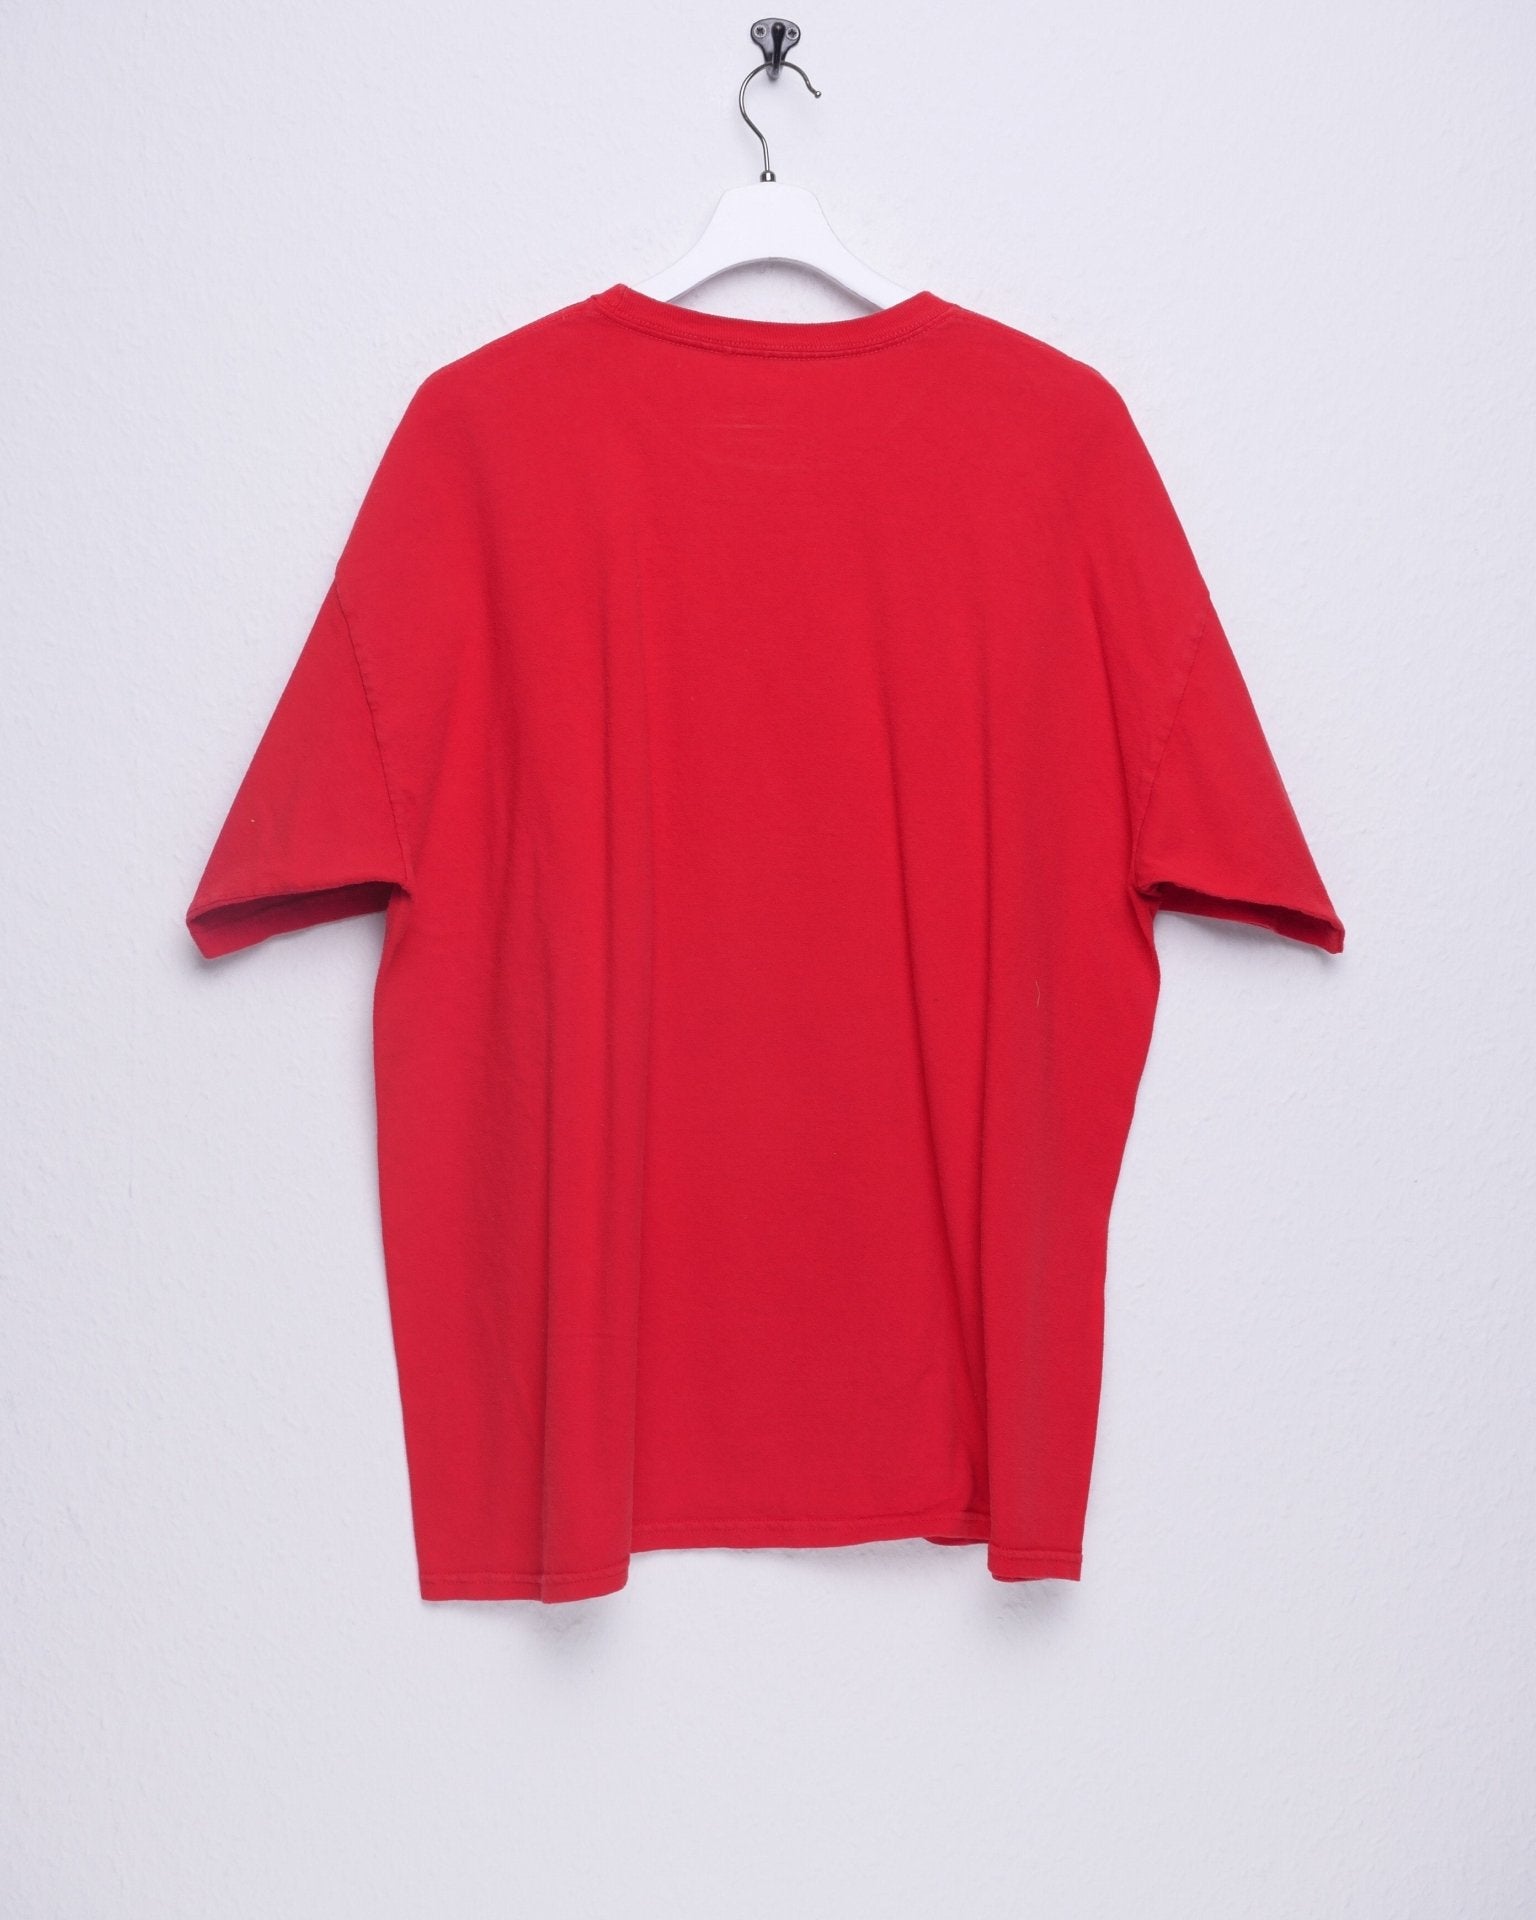 fila printed Spellout red Shirt - Peeces